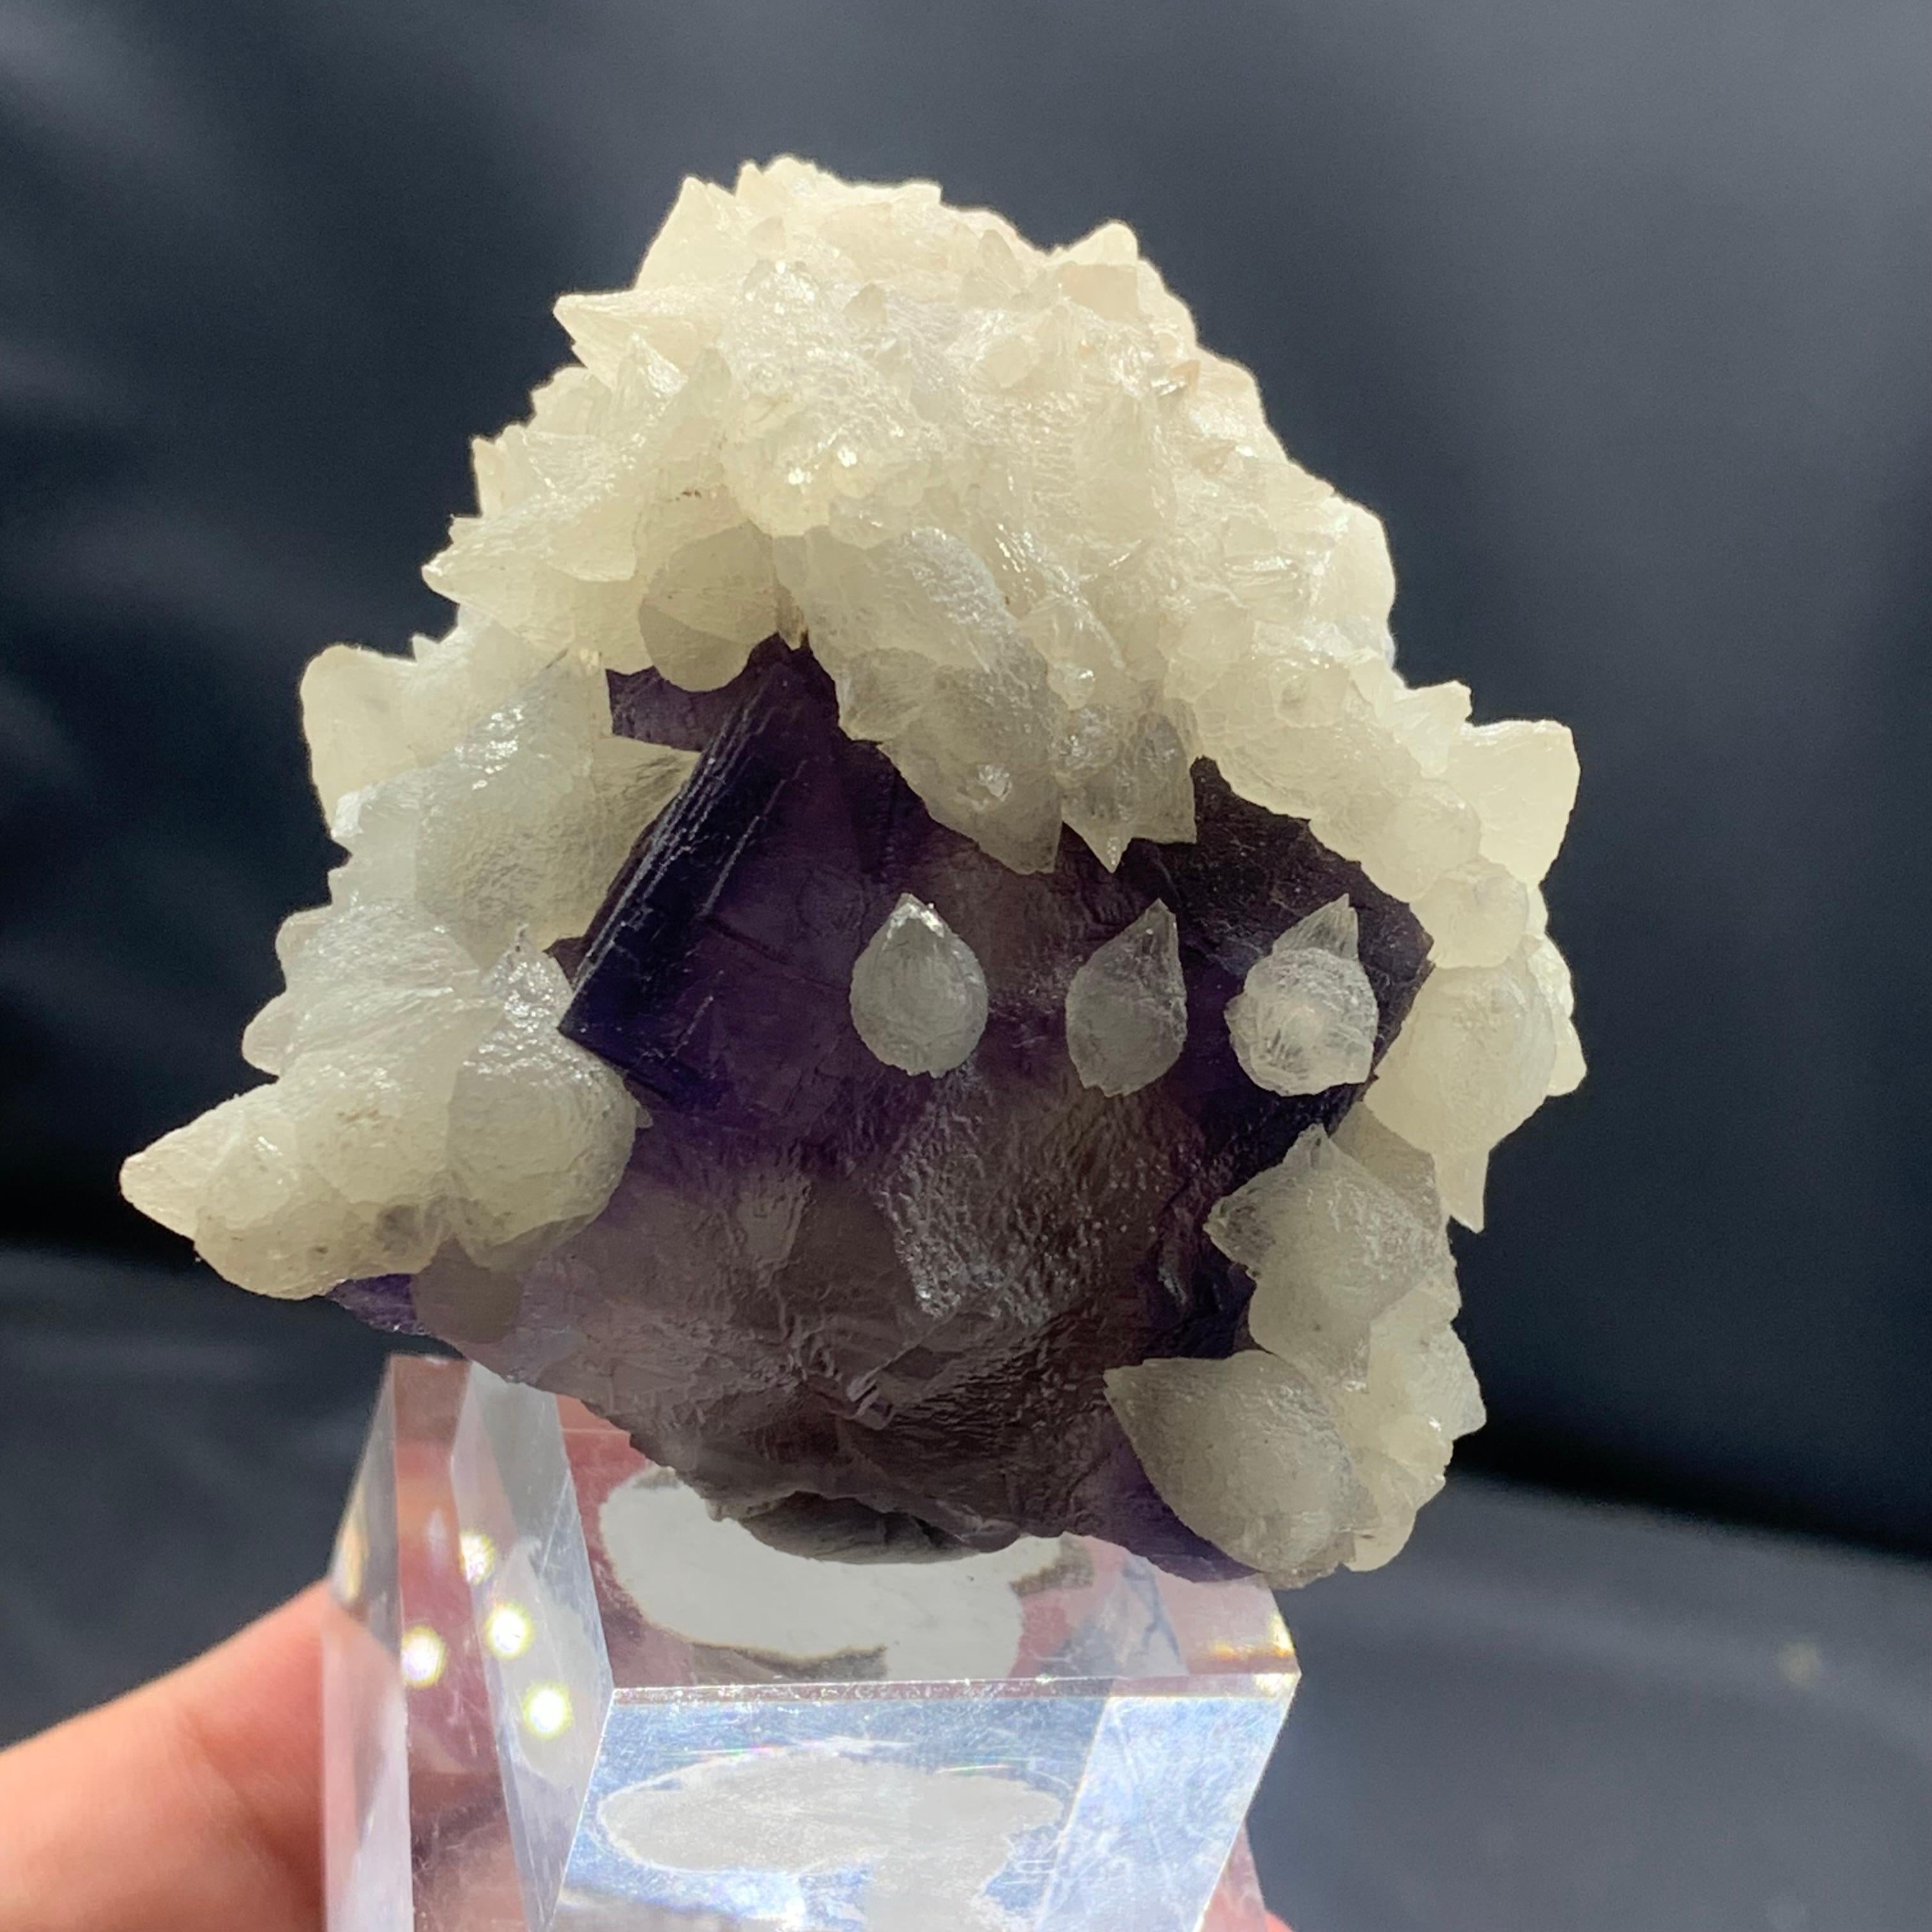 Pakistani Glamorous 162.08 Gram Fluorite Specimen with Dog Tooth from Pakistan  For Sale